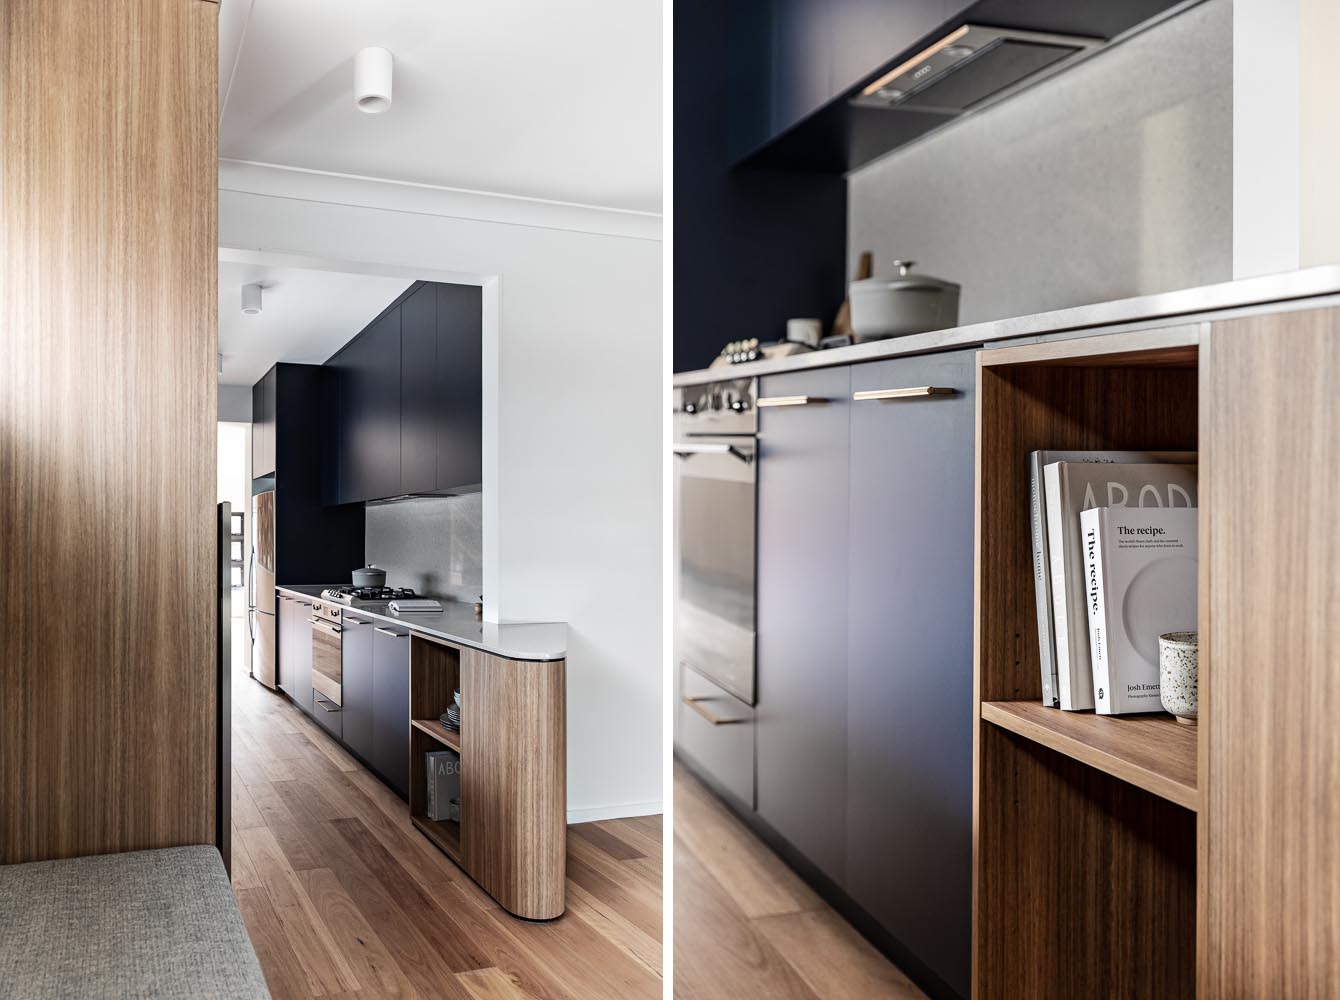 An existing galley kitchen was rebuilt with midnight blue joinery, fluted glass cabinets, soft grey counter tops, long brass handles, and a wine fridge.